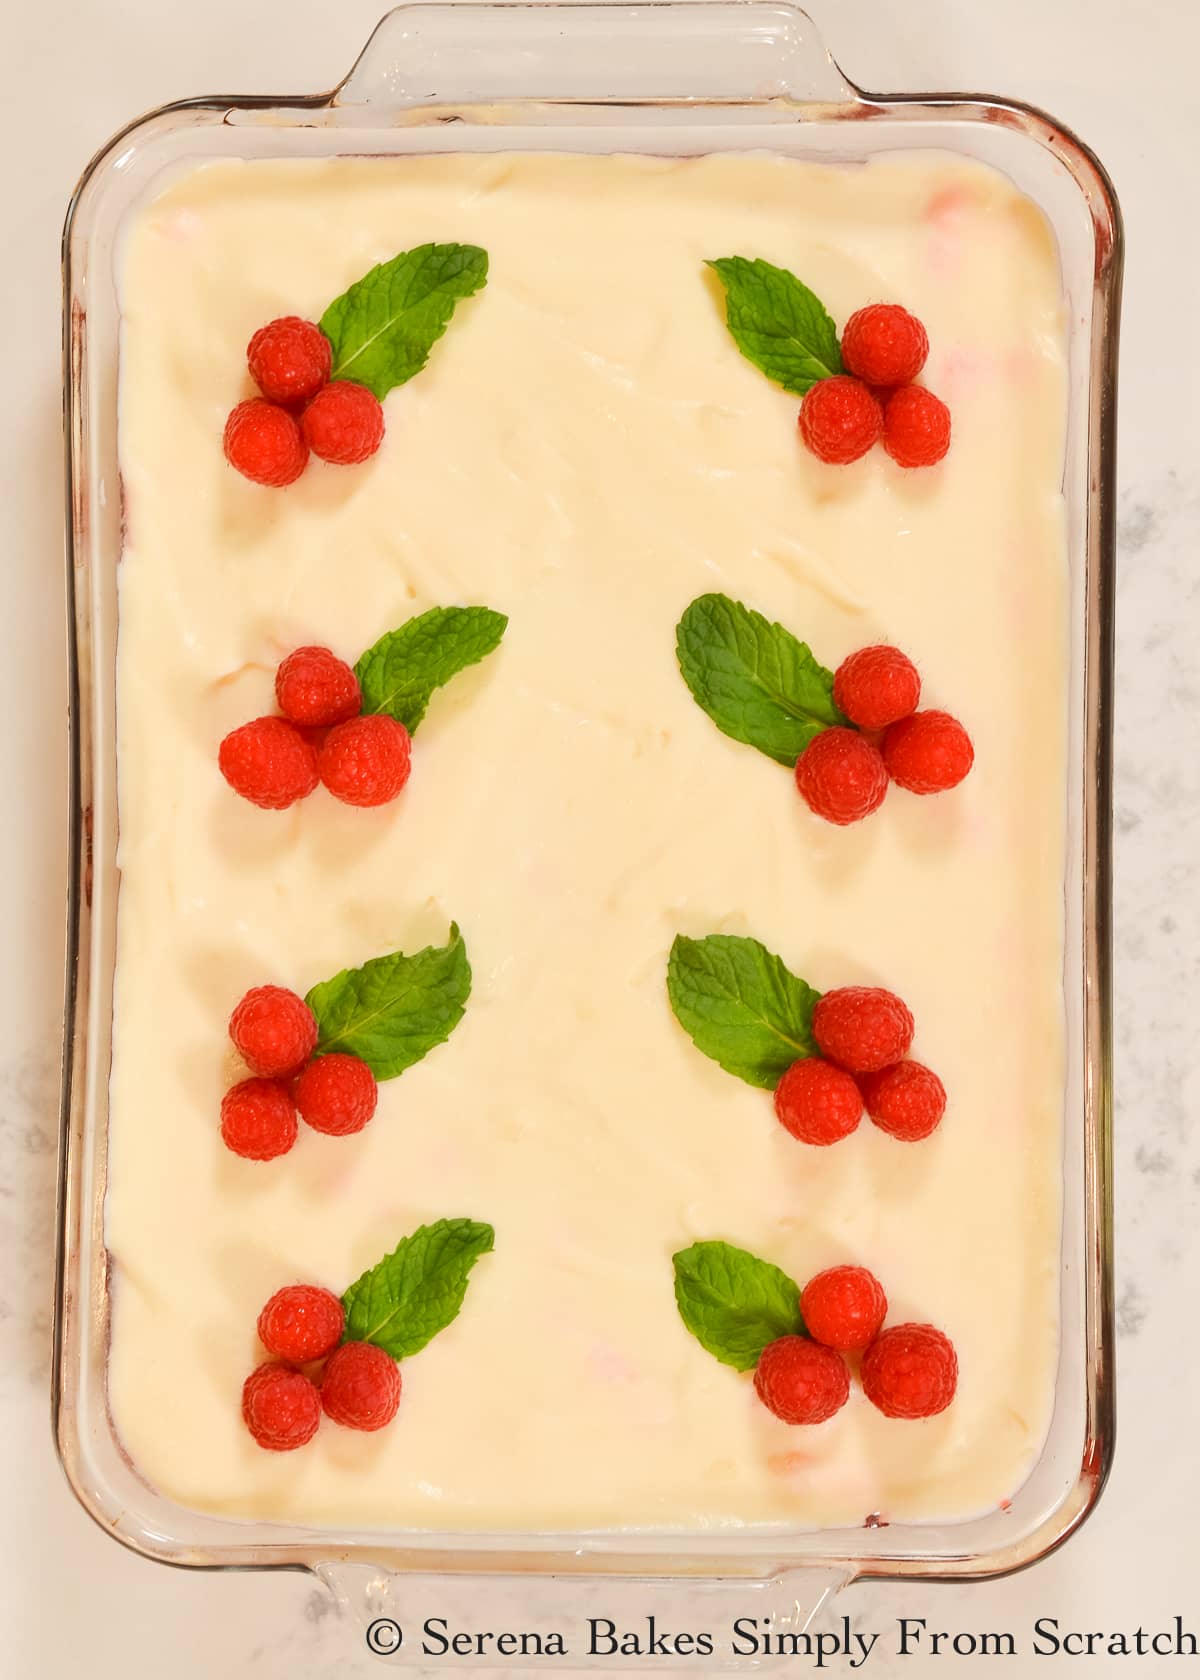 7 Up Raspberry Jello Salad with 4 sets of  3 raspberries and a mint leaf to look like a holly berry for Christmas in a clear glass 9"x13" pan space 4 down each side.